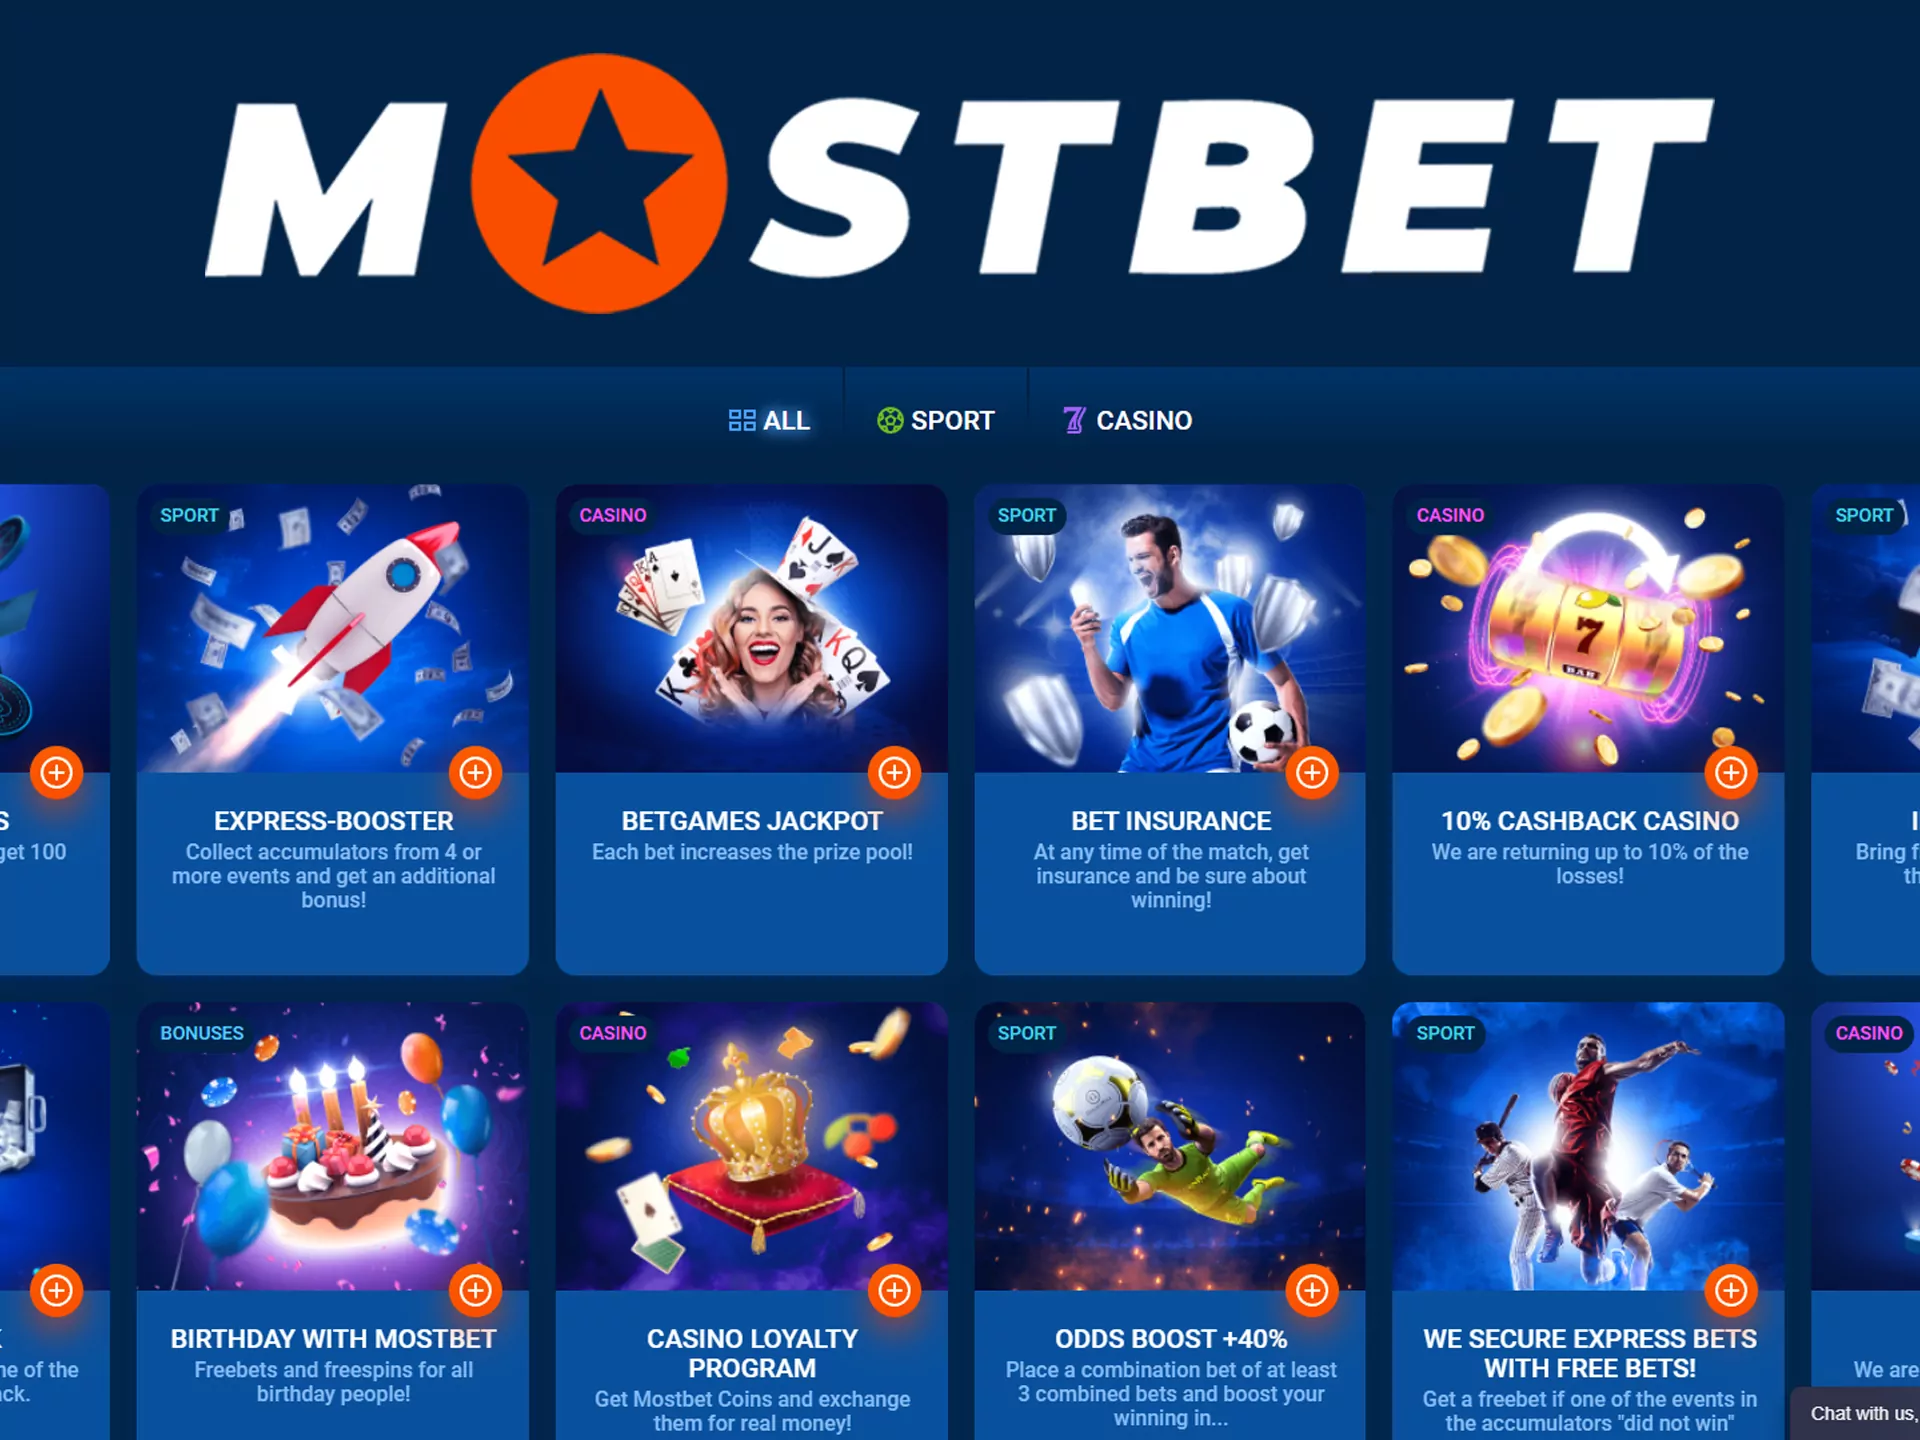 Mostbet betting company has a lot of bonuses for new and regular customers.